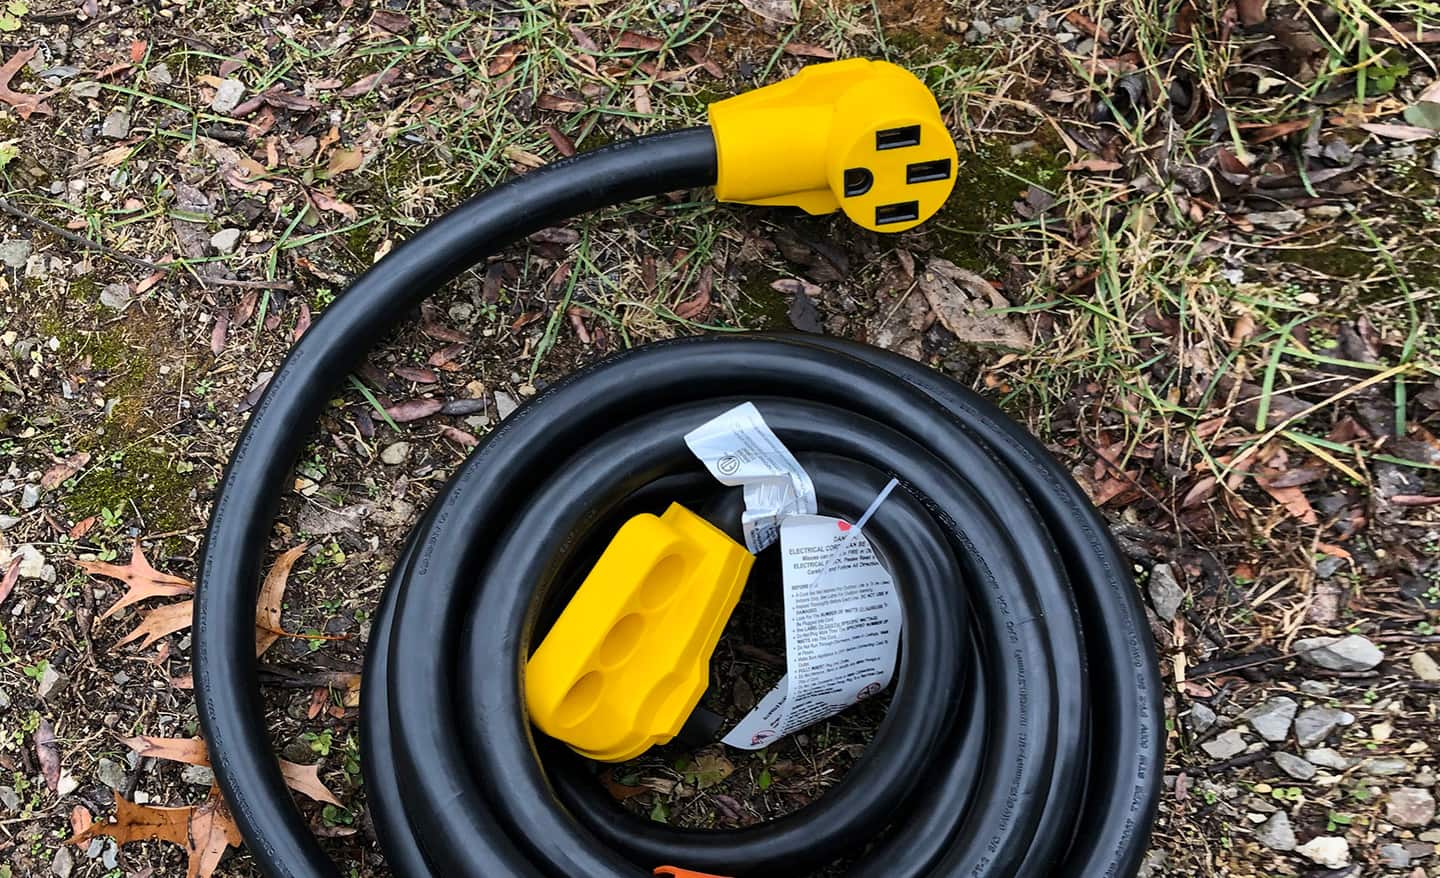 Best Extension Cords for Any Situation - The Home Depot